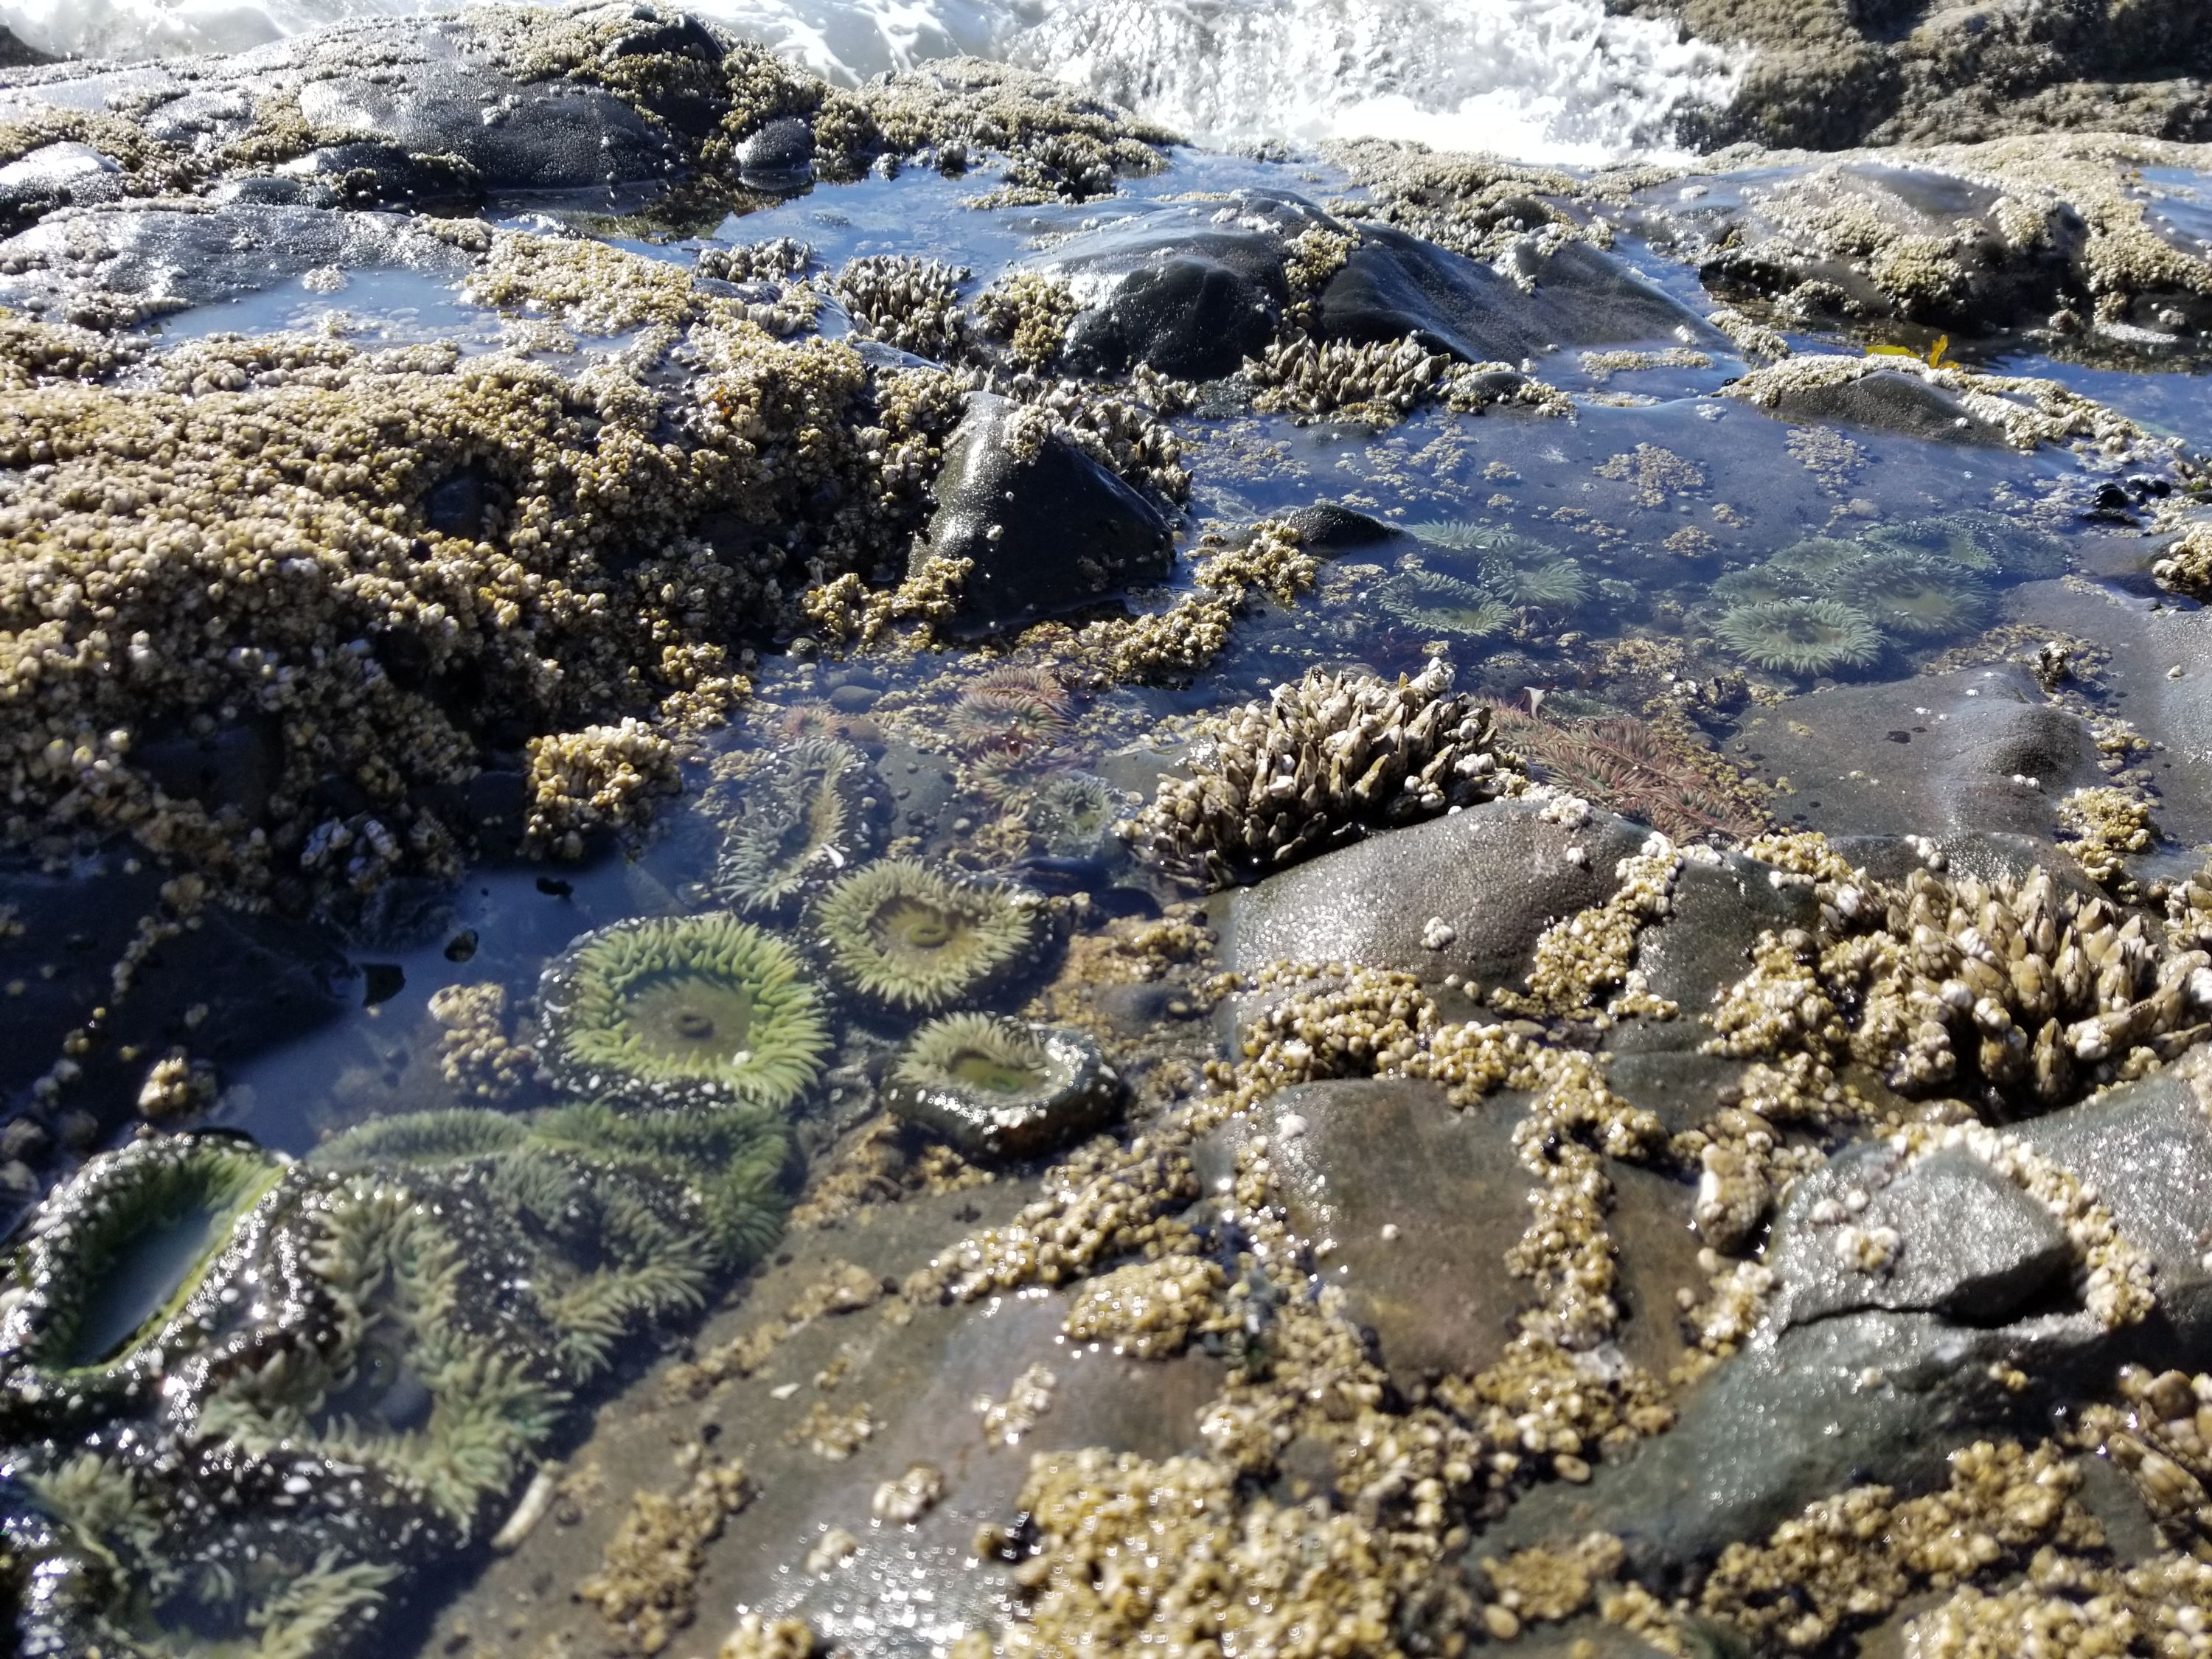 is a section of the intertidal off the Olympic Peninsula in Washington.